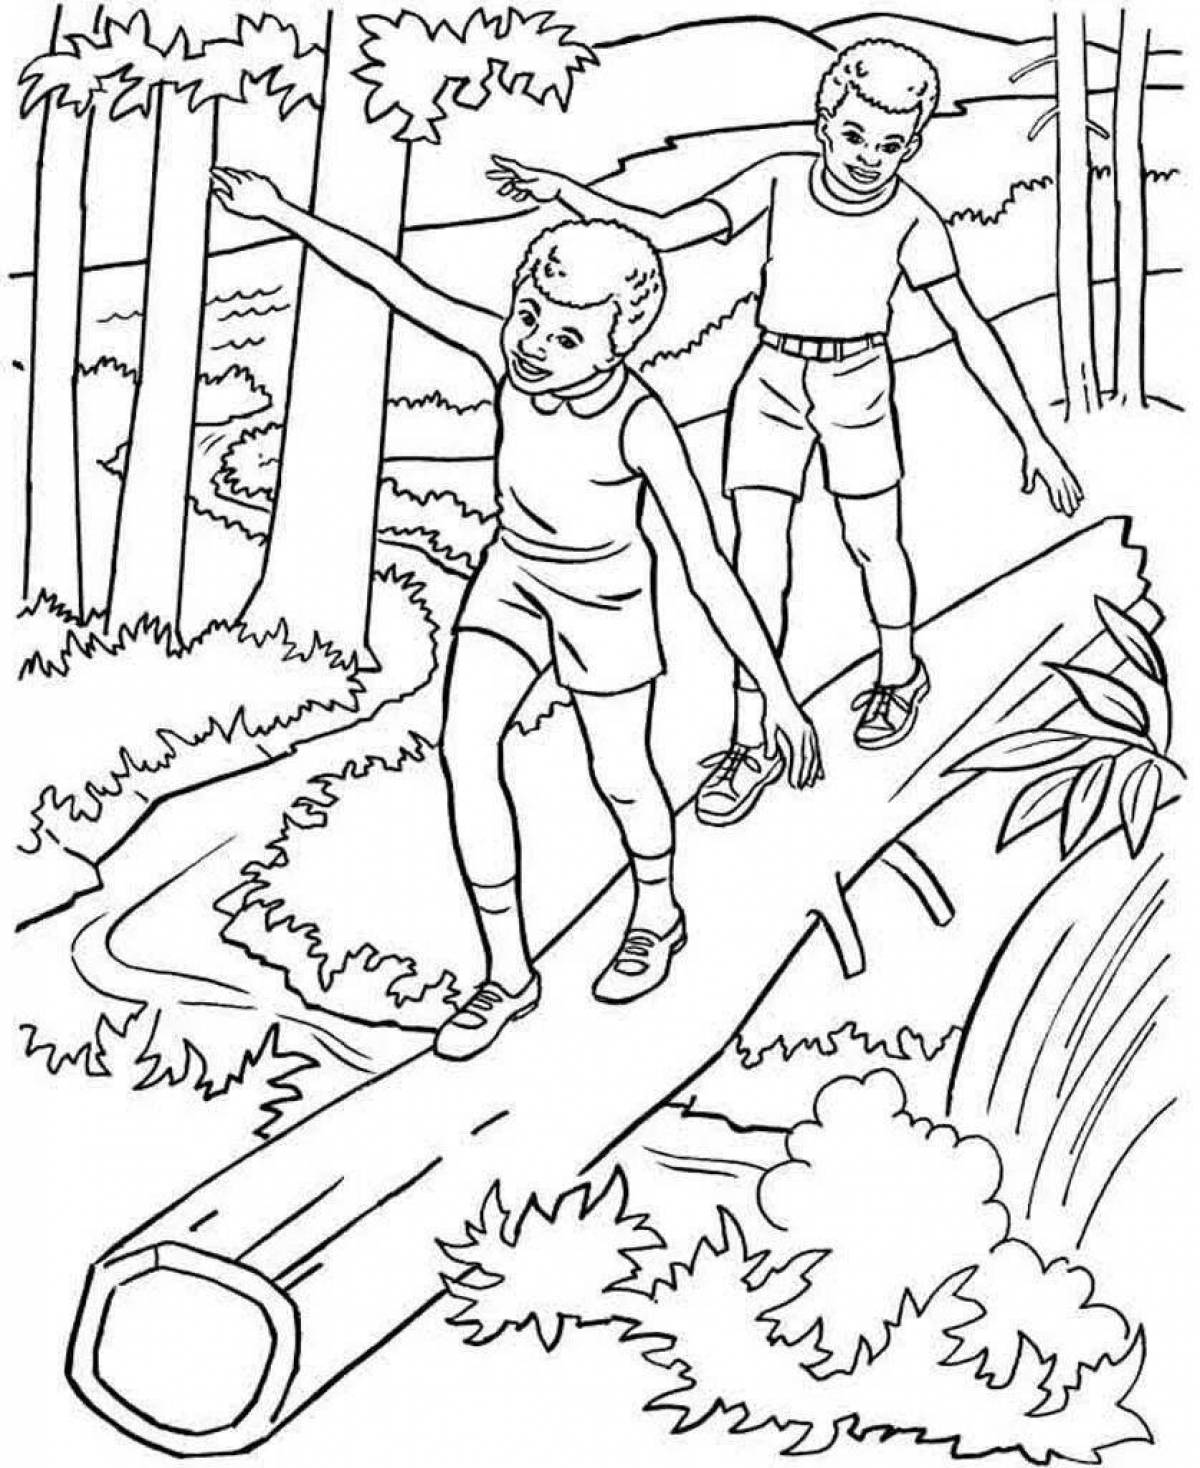 Coloring book living man and nature